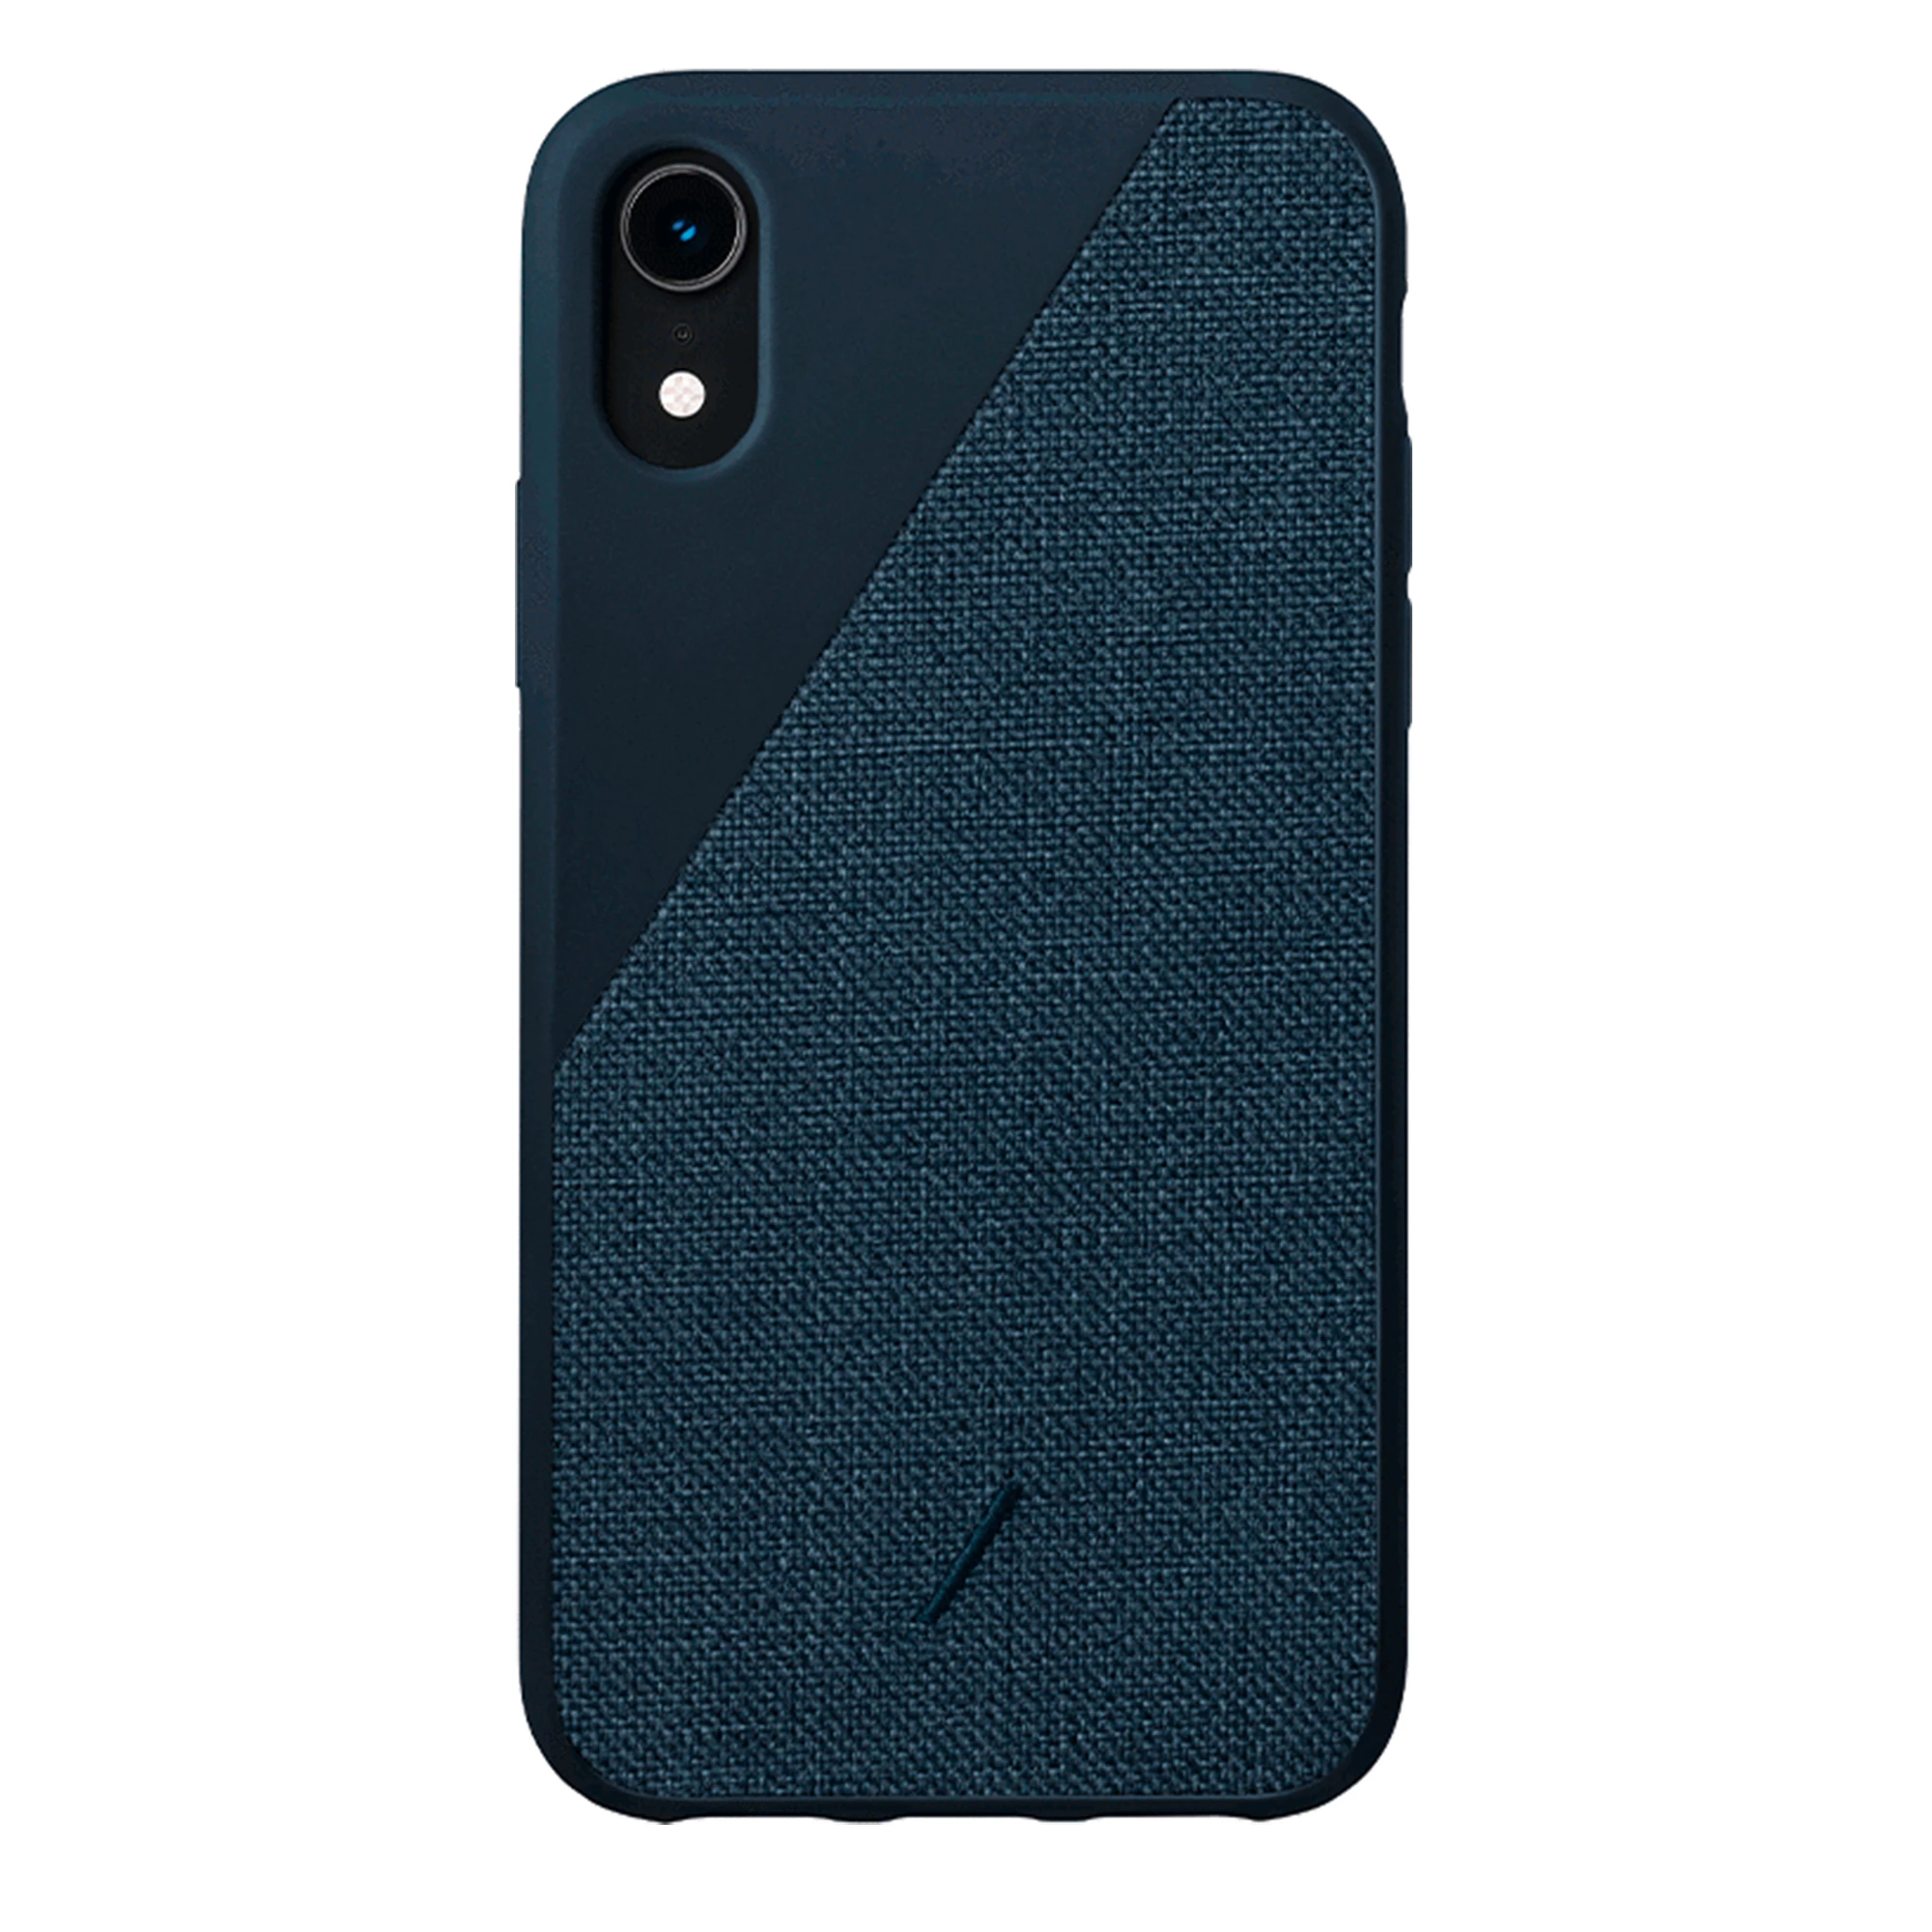 Native Union Clic Canvas Navy for iPhone XR (CCAV-NAVY-NP18M)